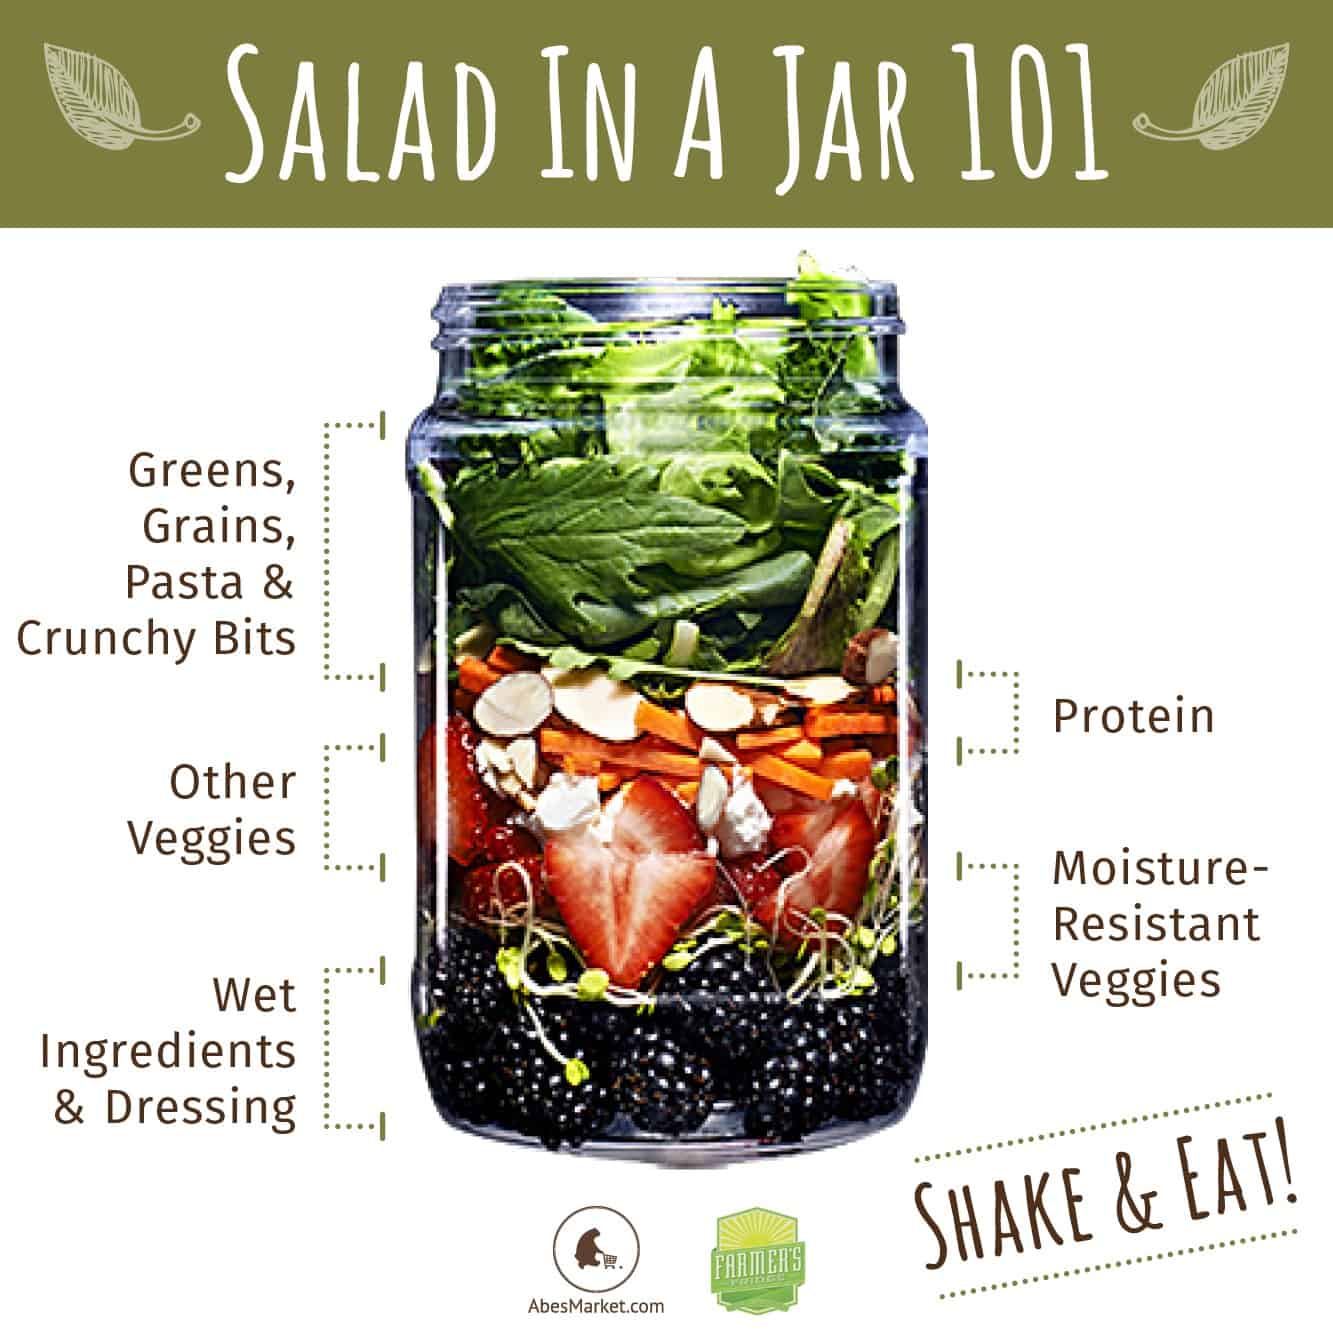 How to pack a salad in a mason jar. Mason jars make great meal prep containers.